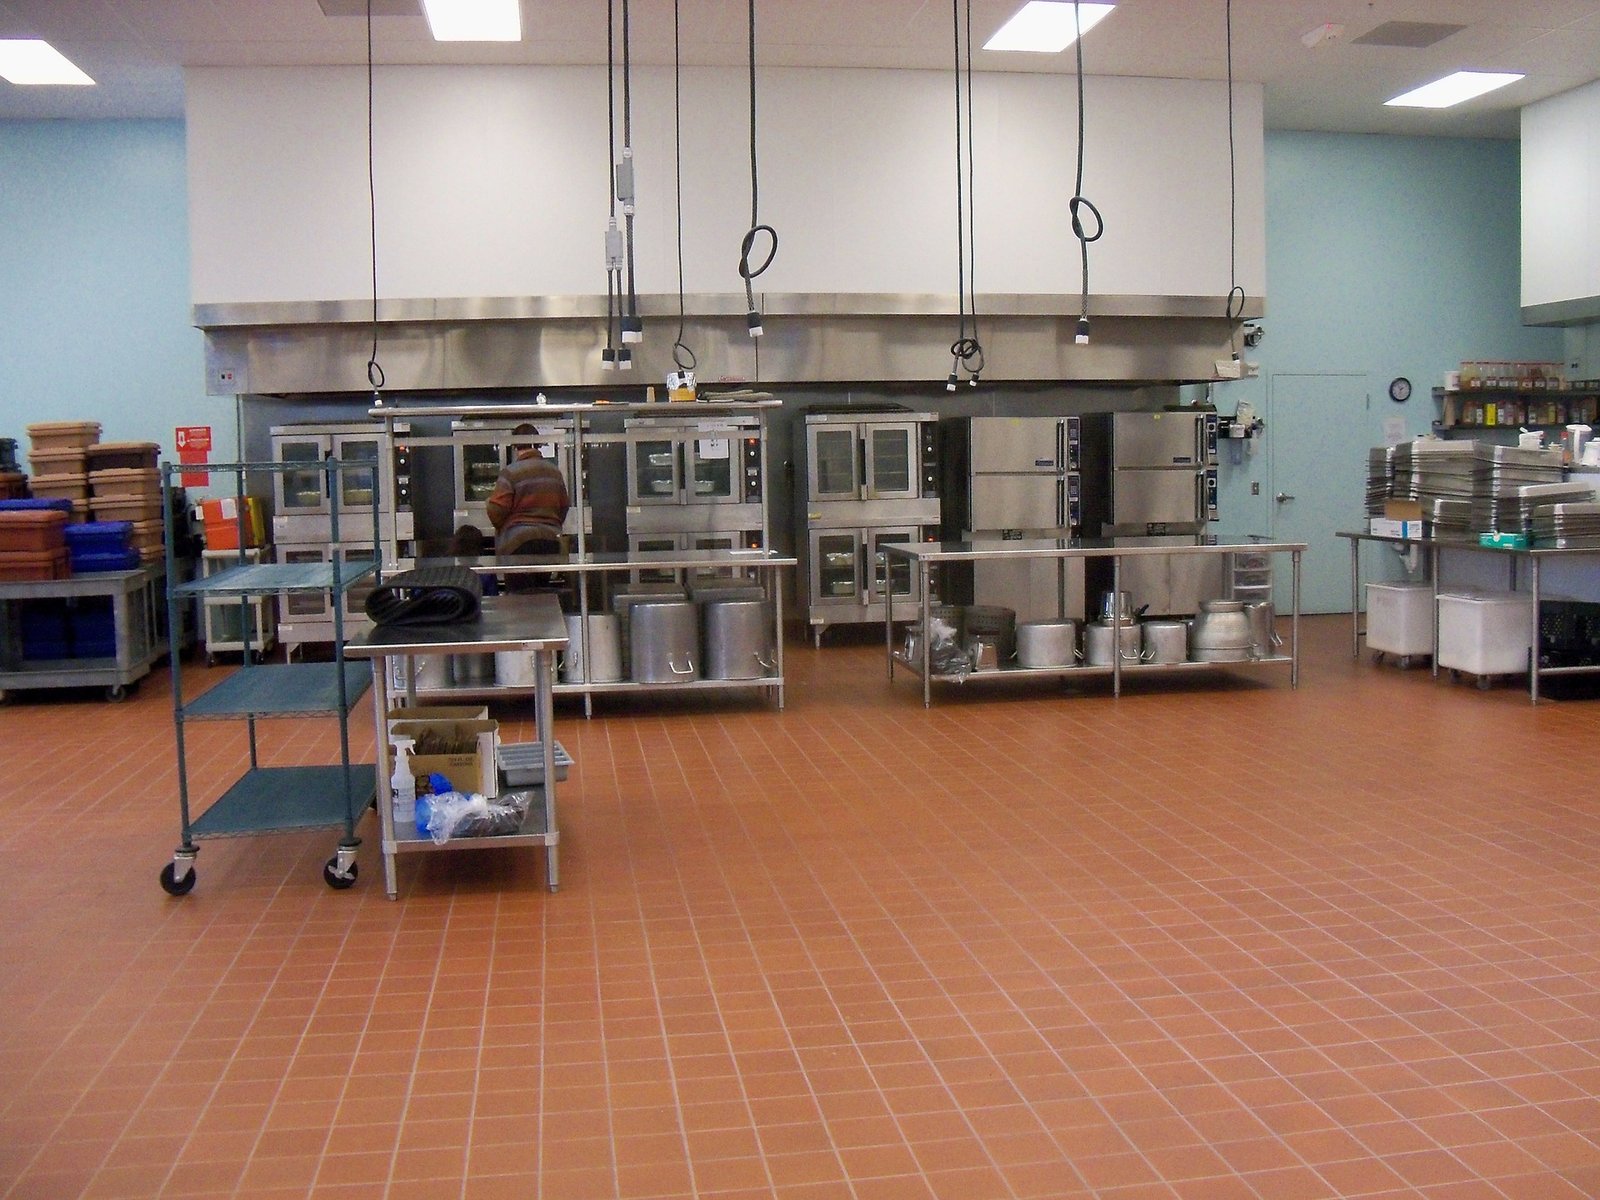 What Equipment Does Every Commercial Kitchen Need?